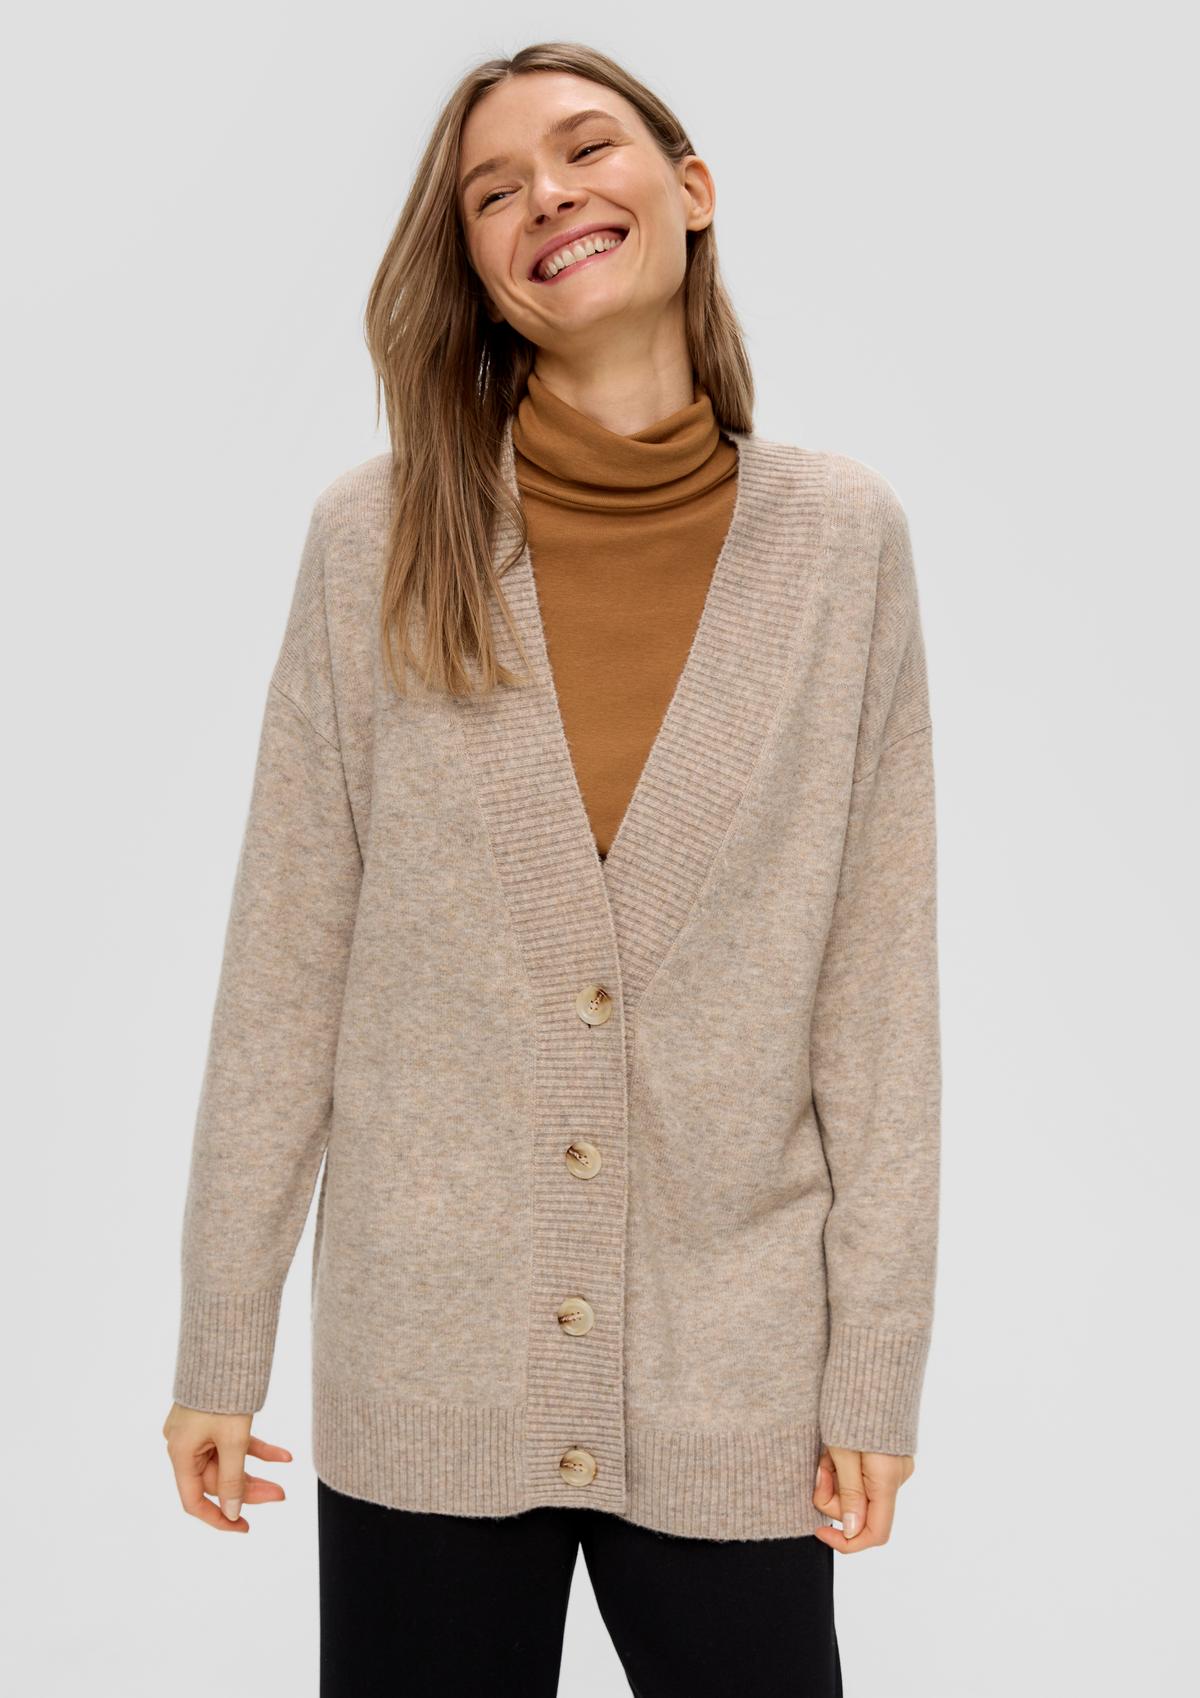 Long cardigan in a - wool blend sand